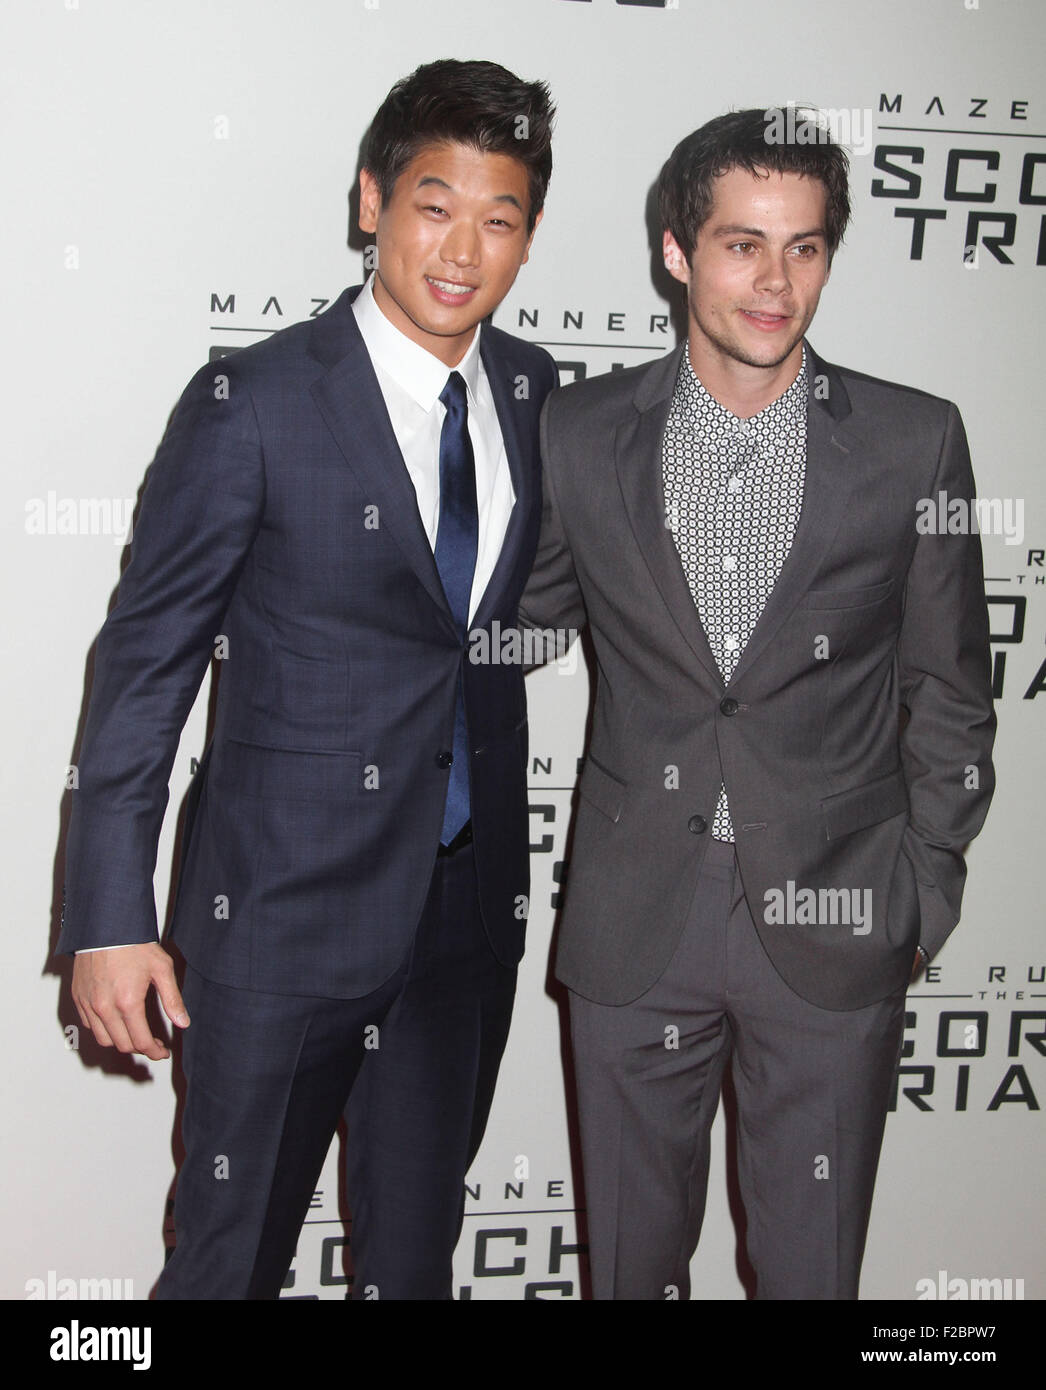 New York premiere of 'Maze Runner: The Scorch Trials' held at Regal E-Walk  - Arrivals Featuring: the cast of Maze Runner: The Scorch Trials Where:  New York, New York, United States When